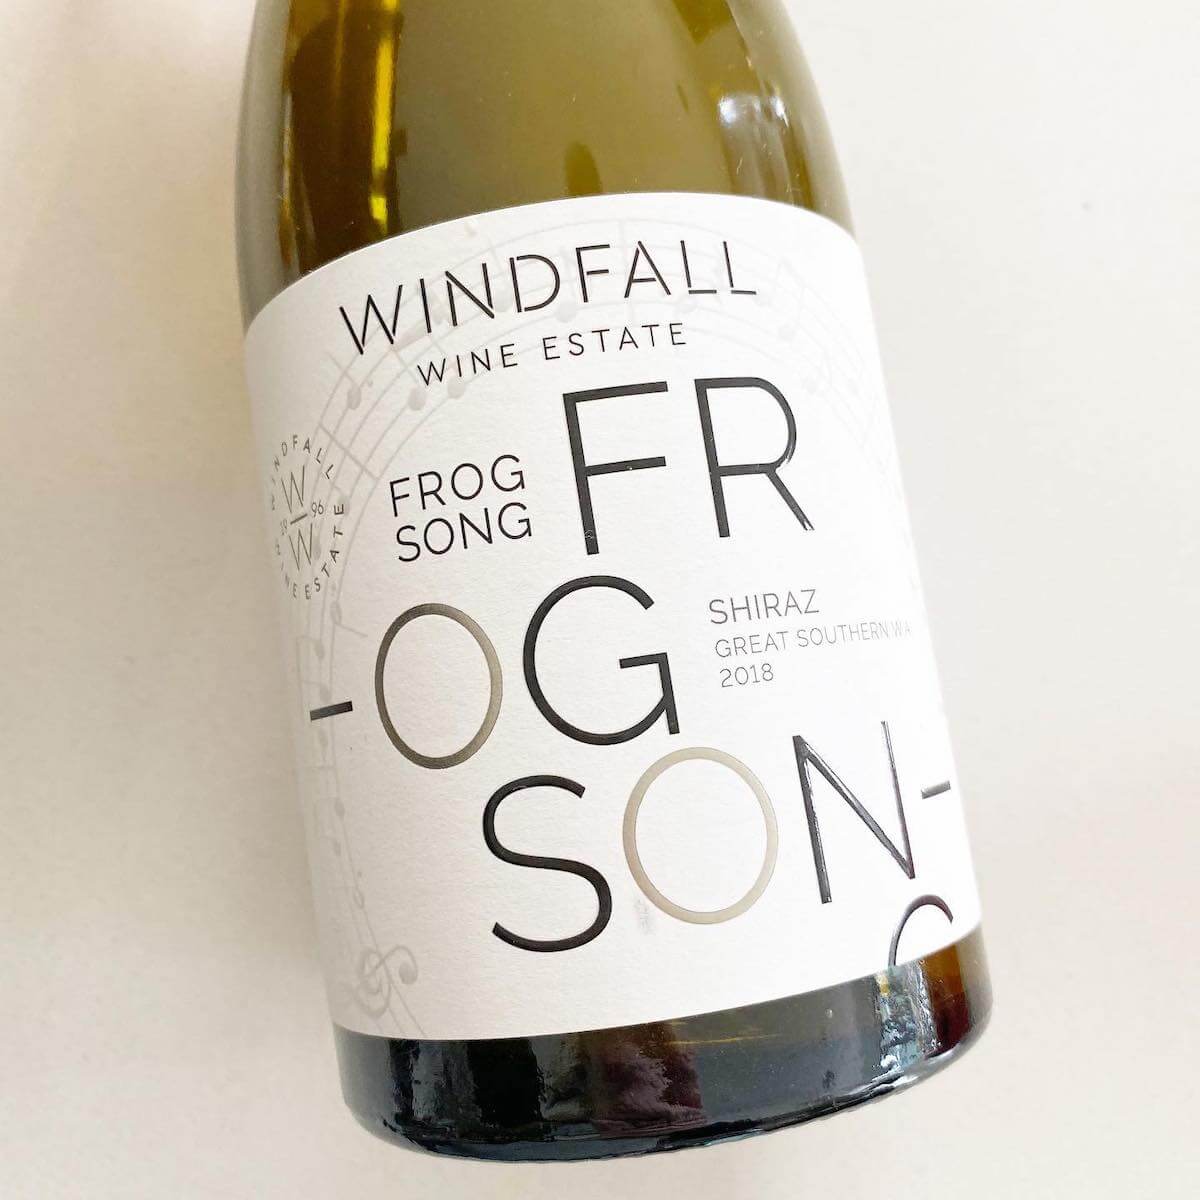 Windfall Wine Estate 2018 ‘Frog Song’ Shiraz – Great Southern